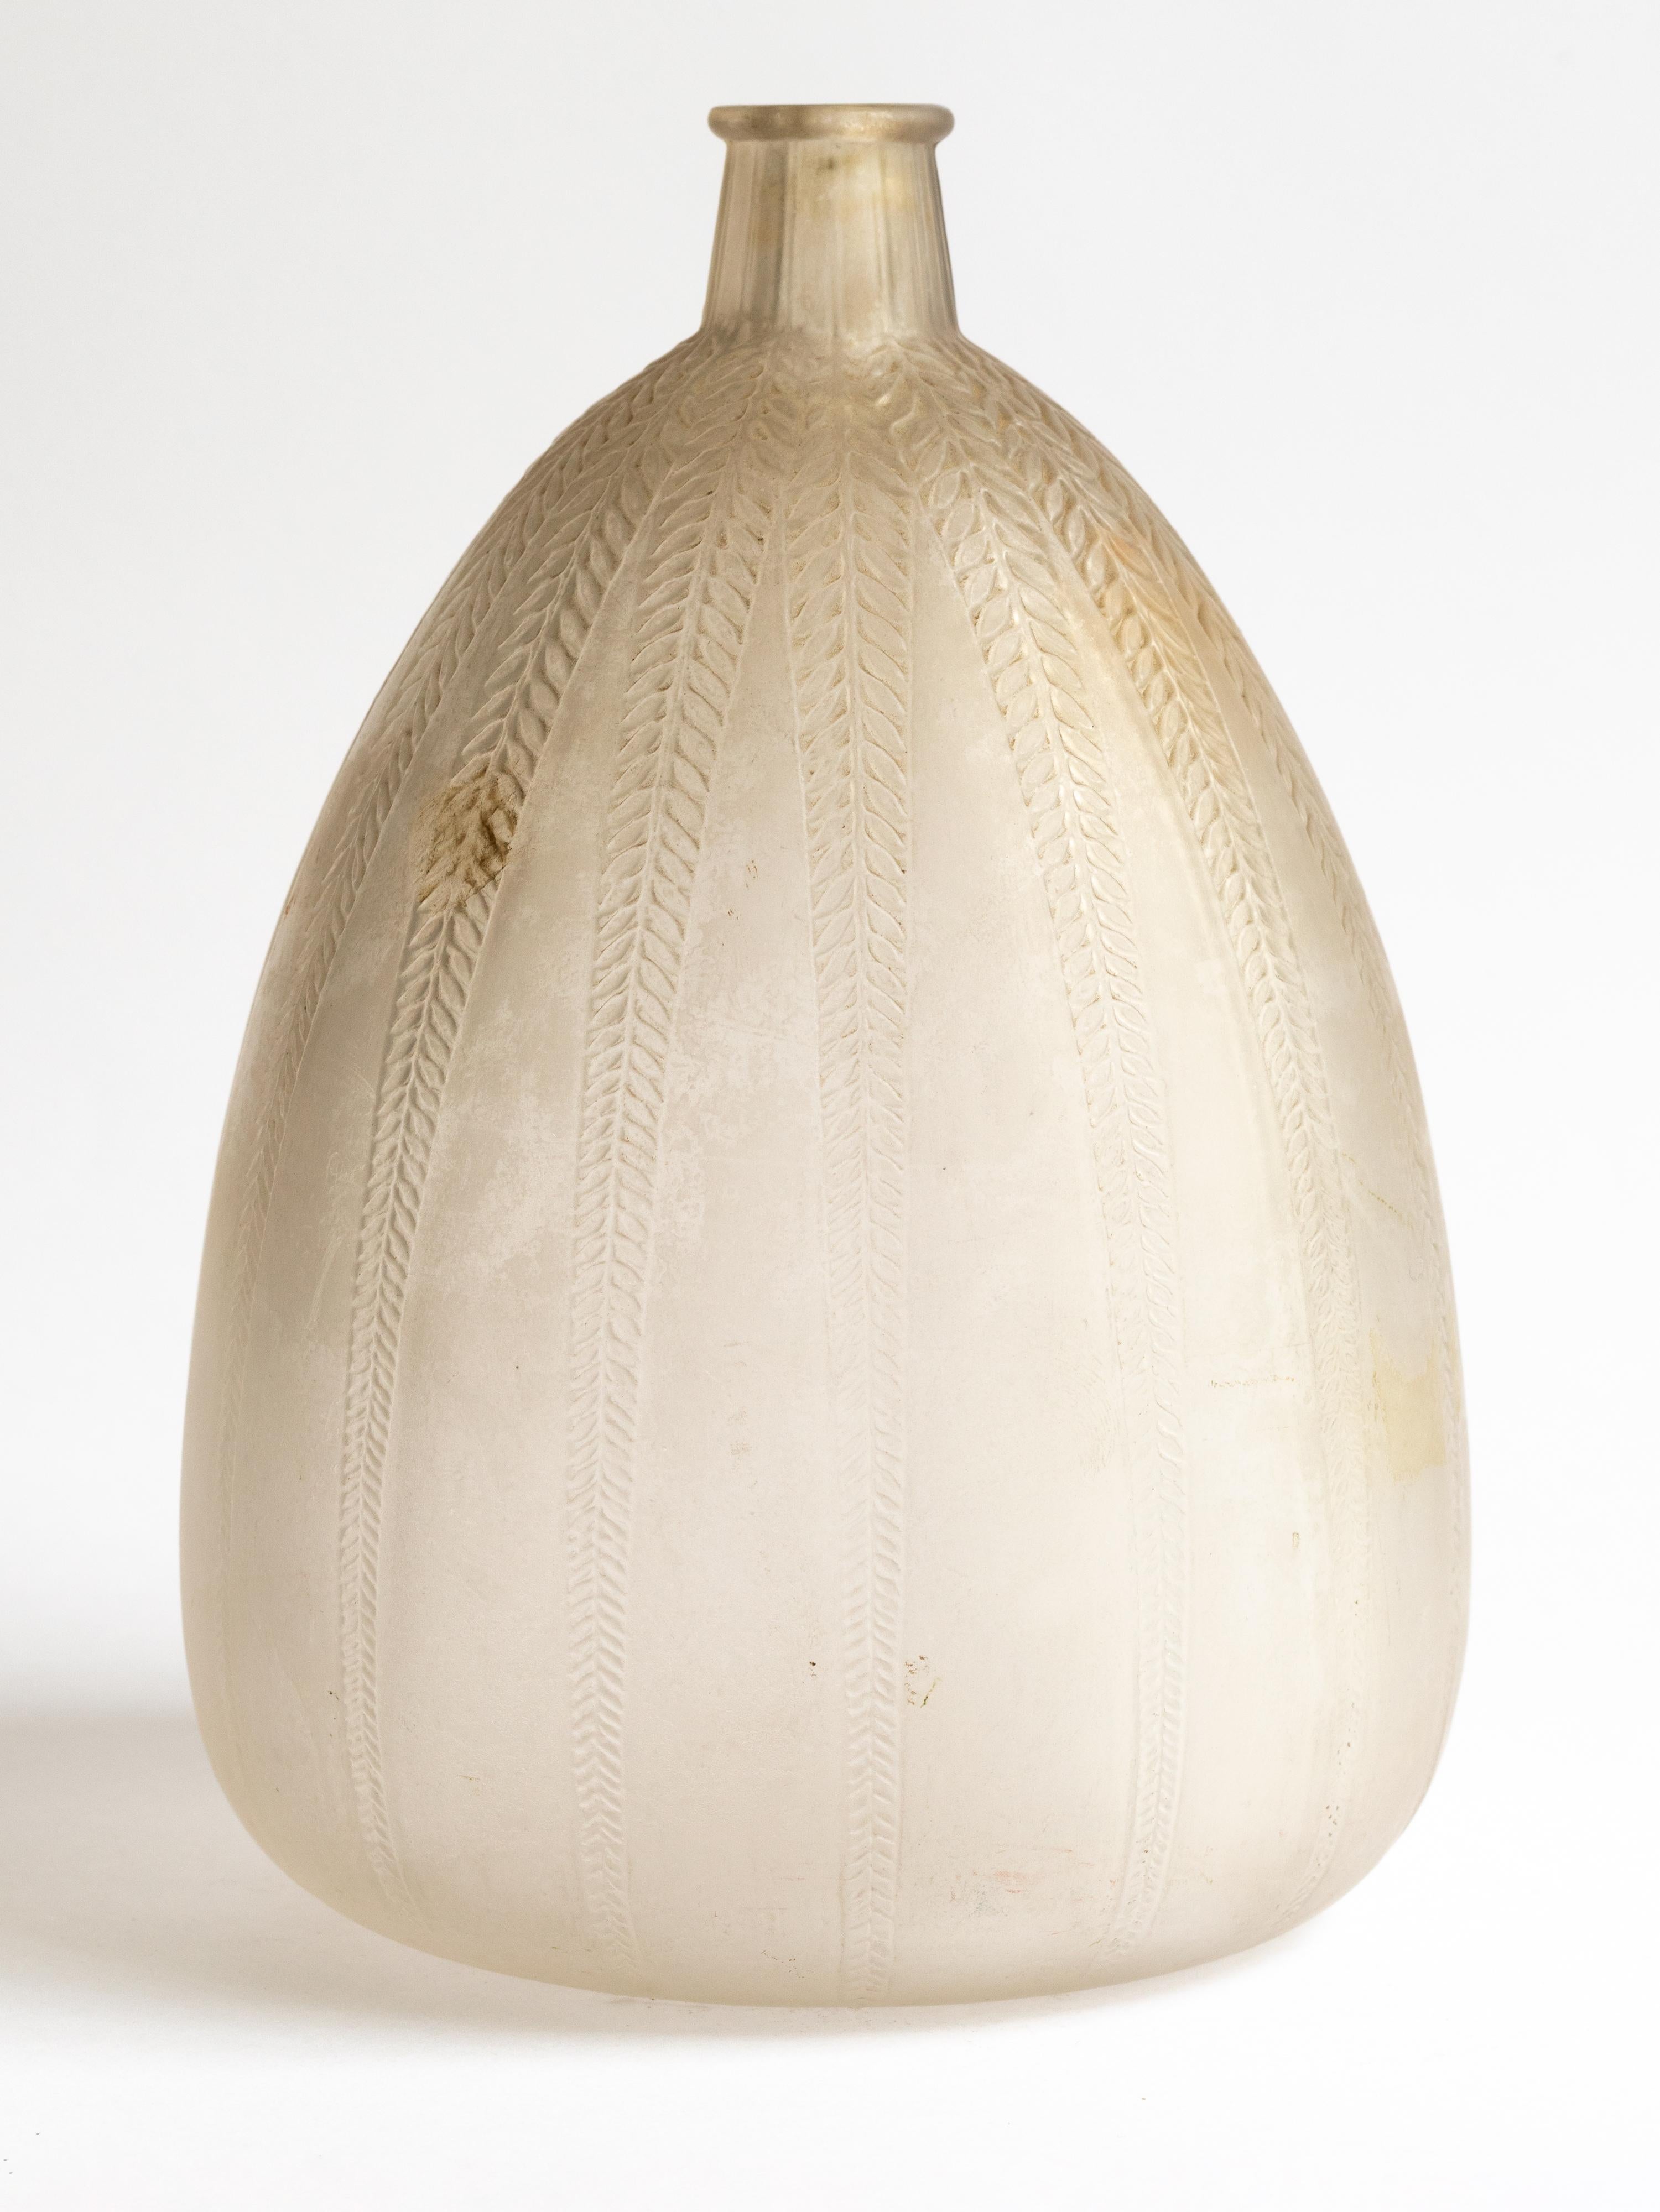 René Lalique triangular shaped encircling downward pointing vertically arranged repeating leaves motif in frosted and patinated glass.
Vase under a short and narrow neck. 

Moulded mark R.Lalique.

Bibliography: Félix Marcilhac, Catalogue raisonné,